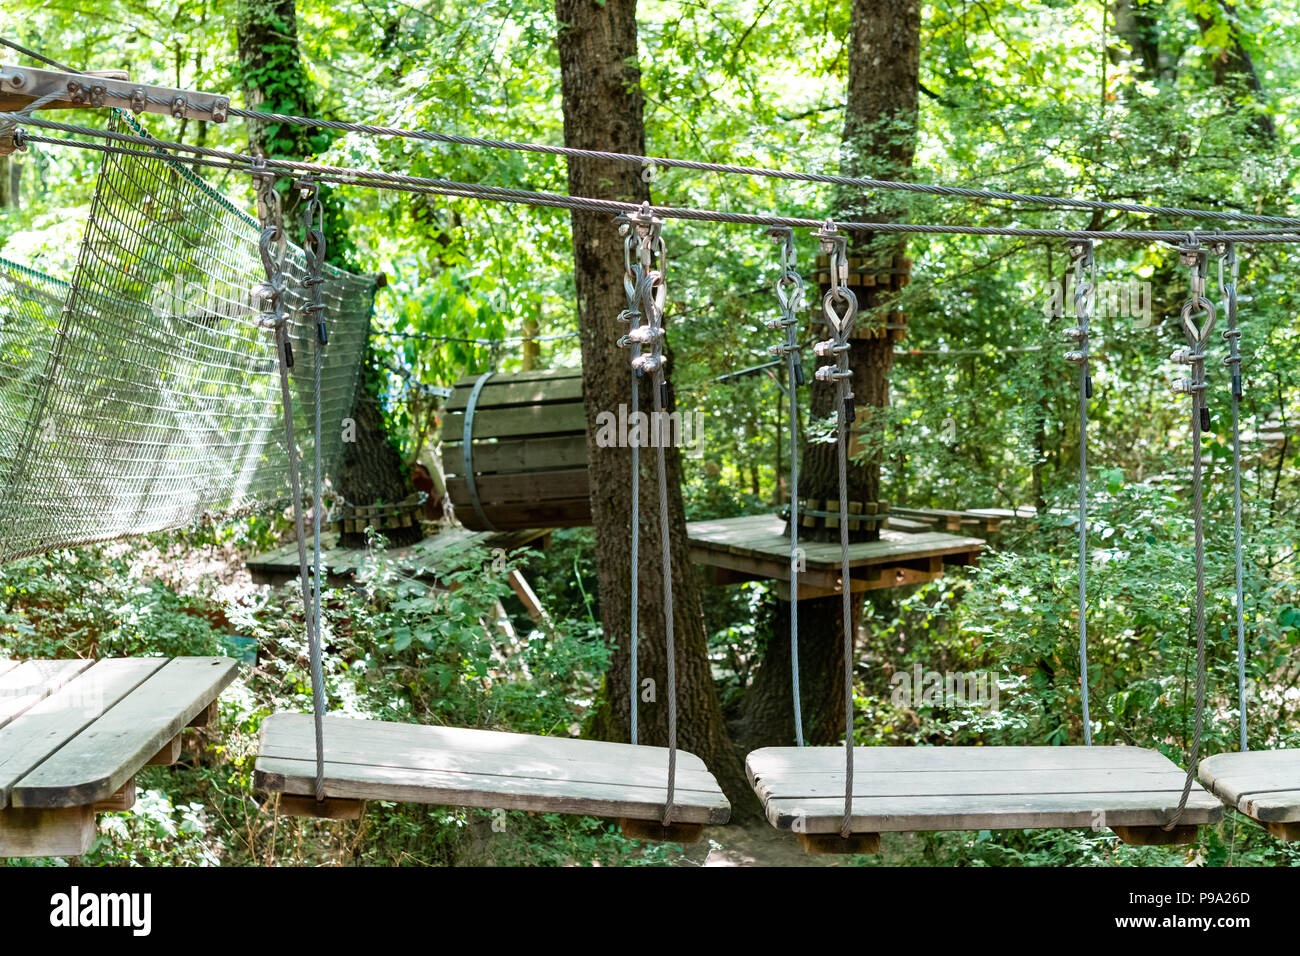 Way to challenge climbing and balance path in adventure playground in the forest Stock Photo